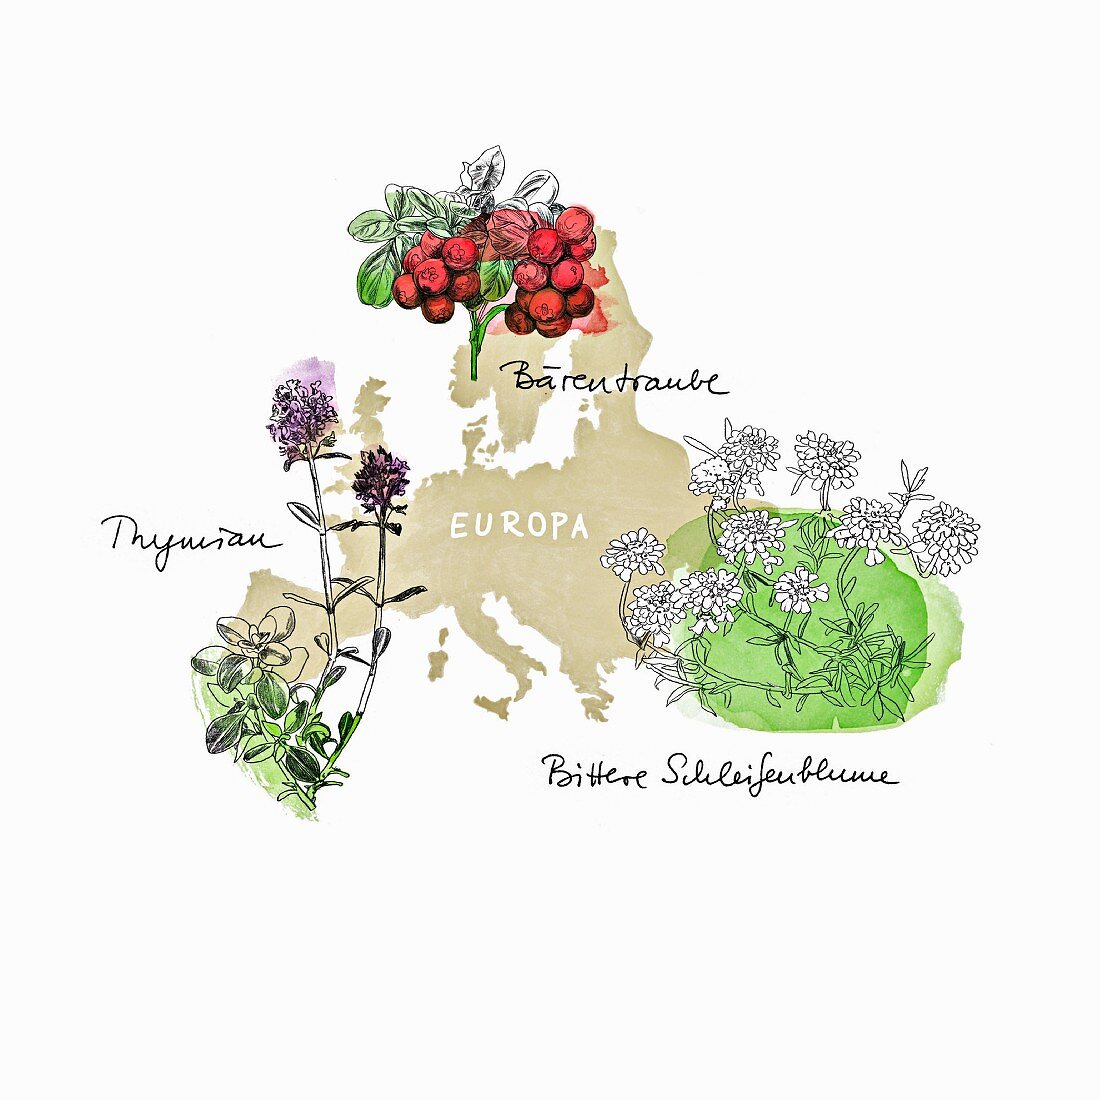 Medicinal herbs from Europe